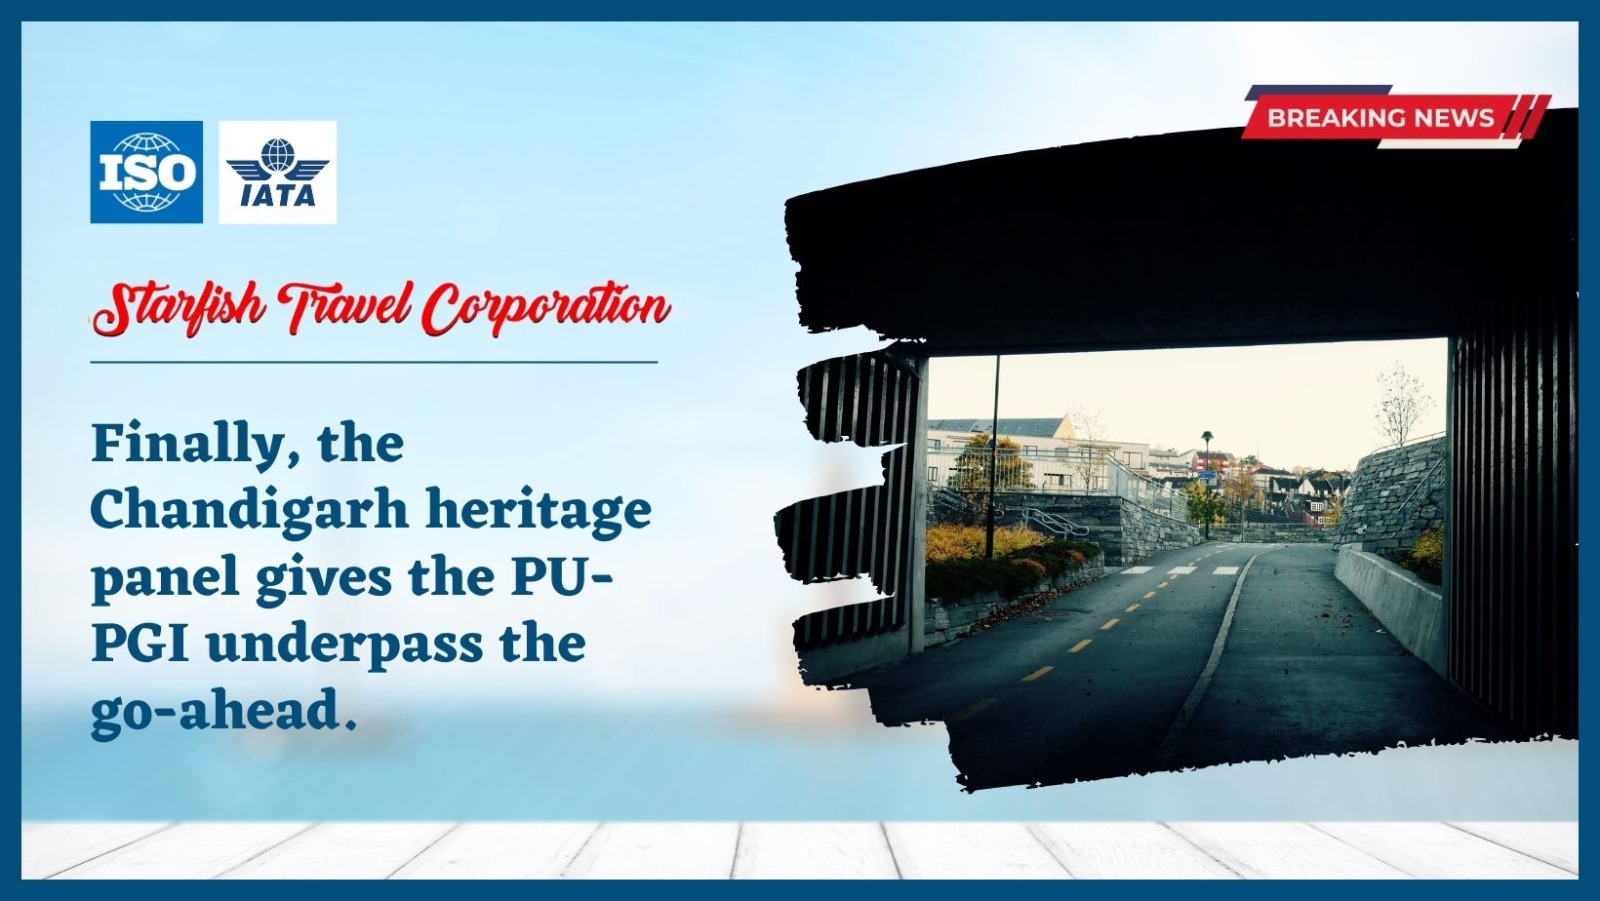 Finally, the Chandigarh heritage panel gives the PU-PGI underpass the go-ahead.